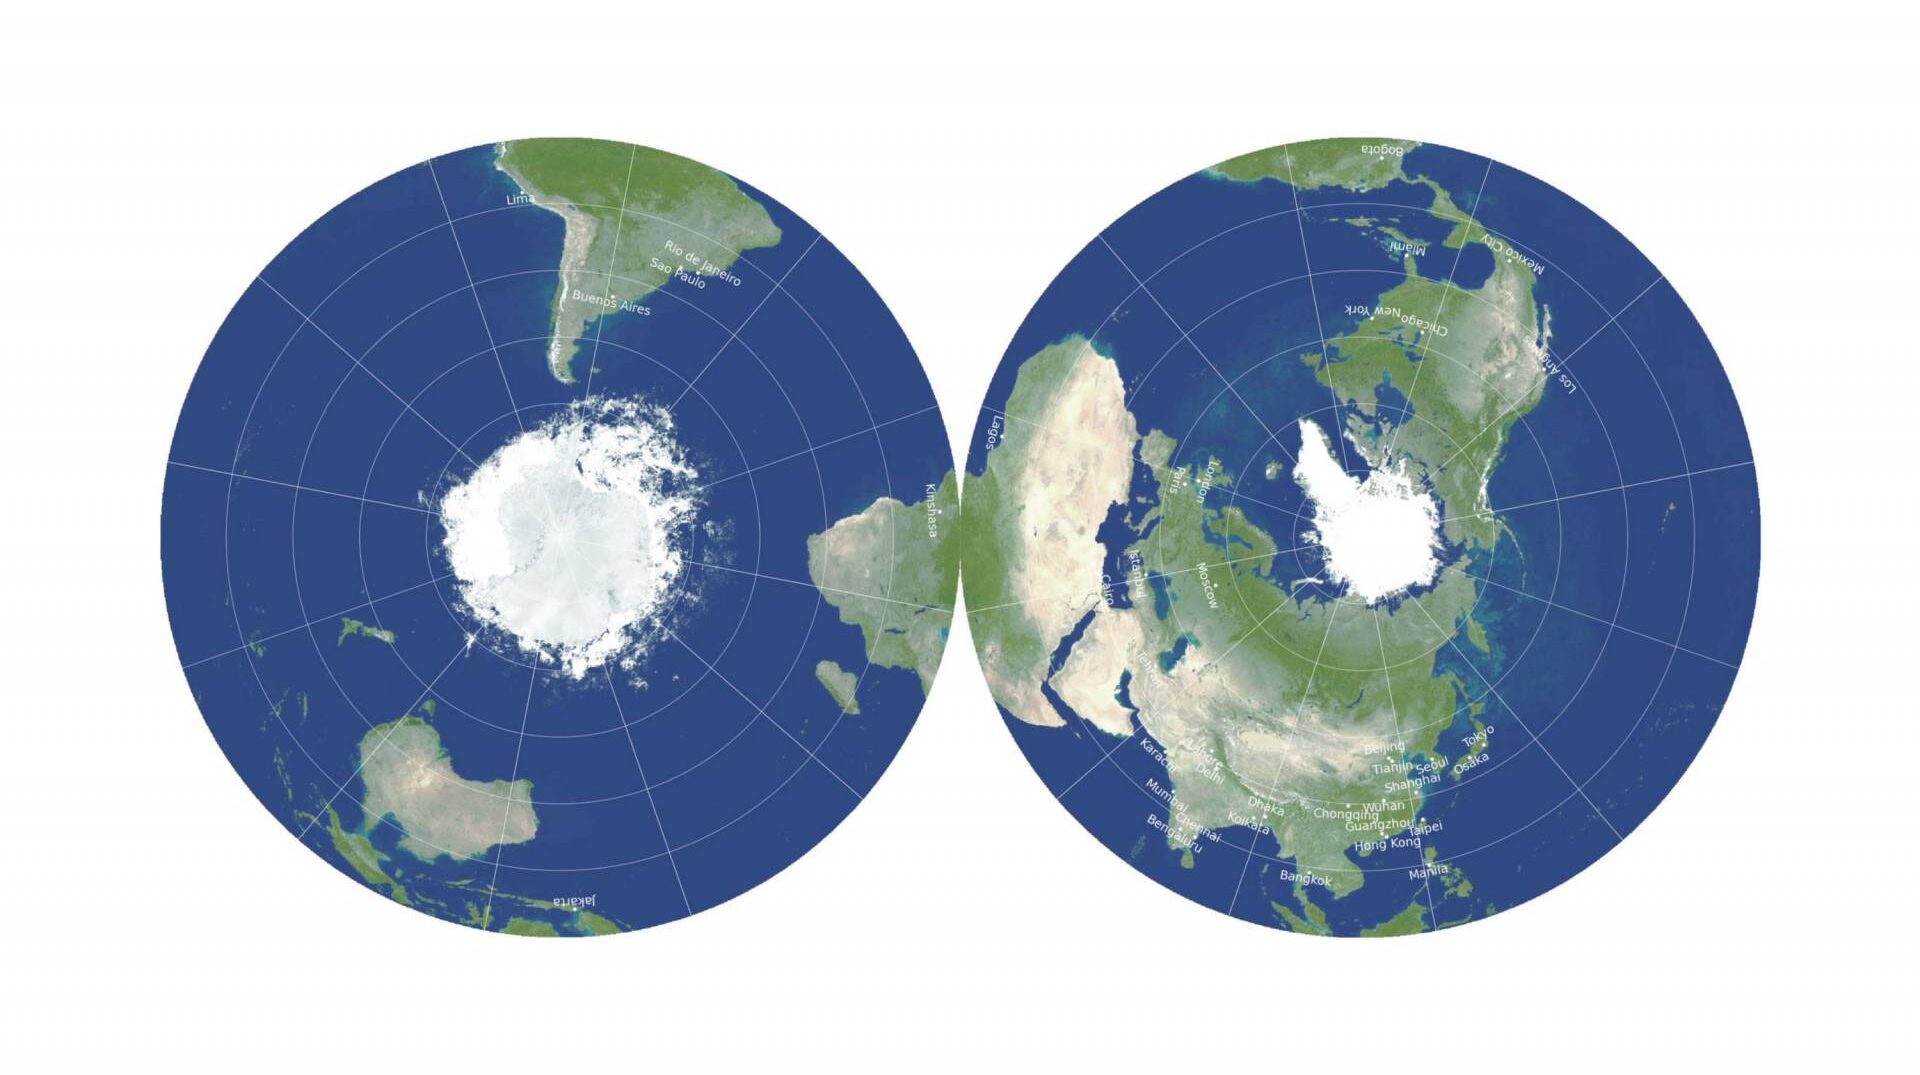 equidistant azimuthal projection rotated